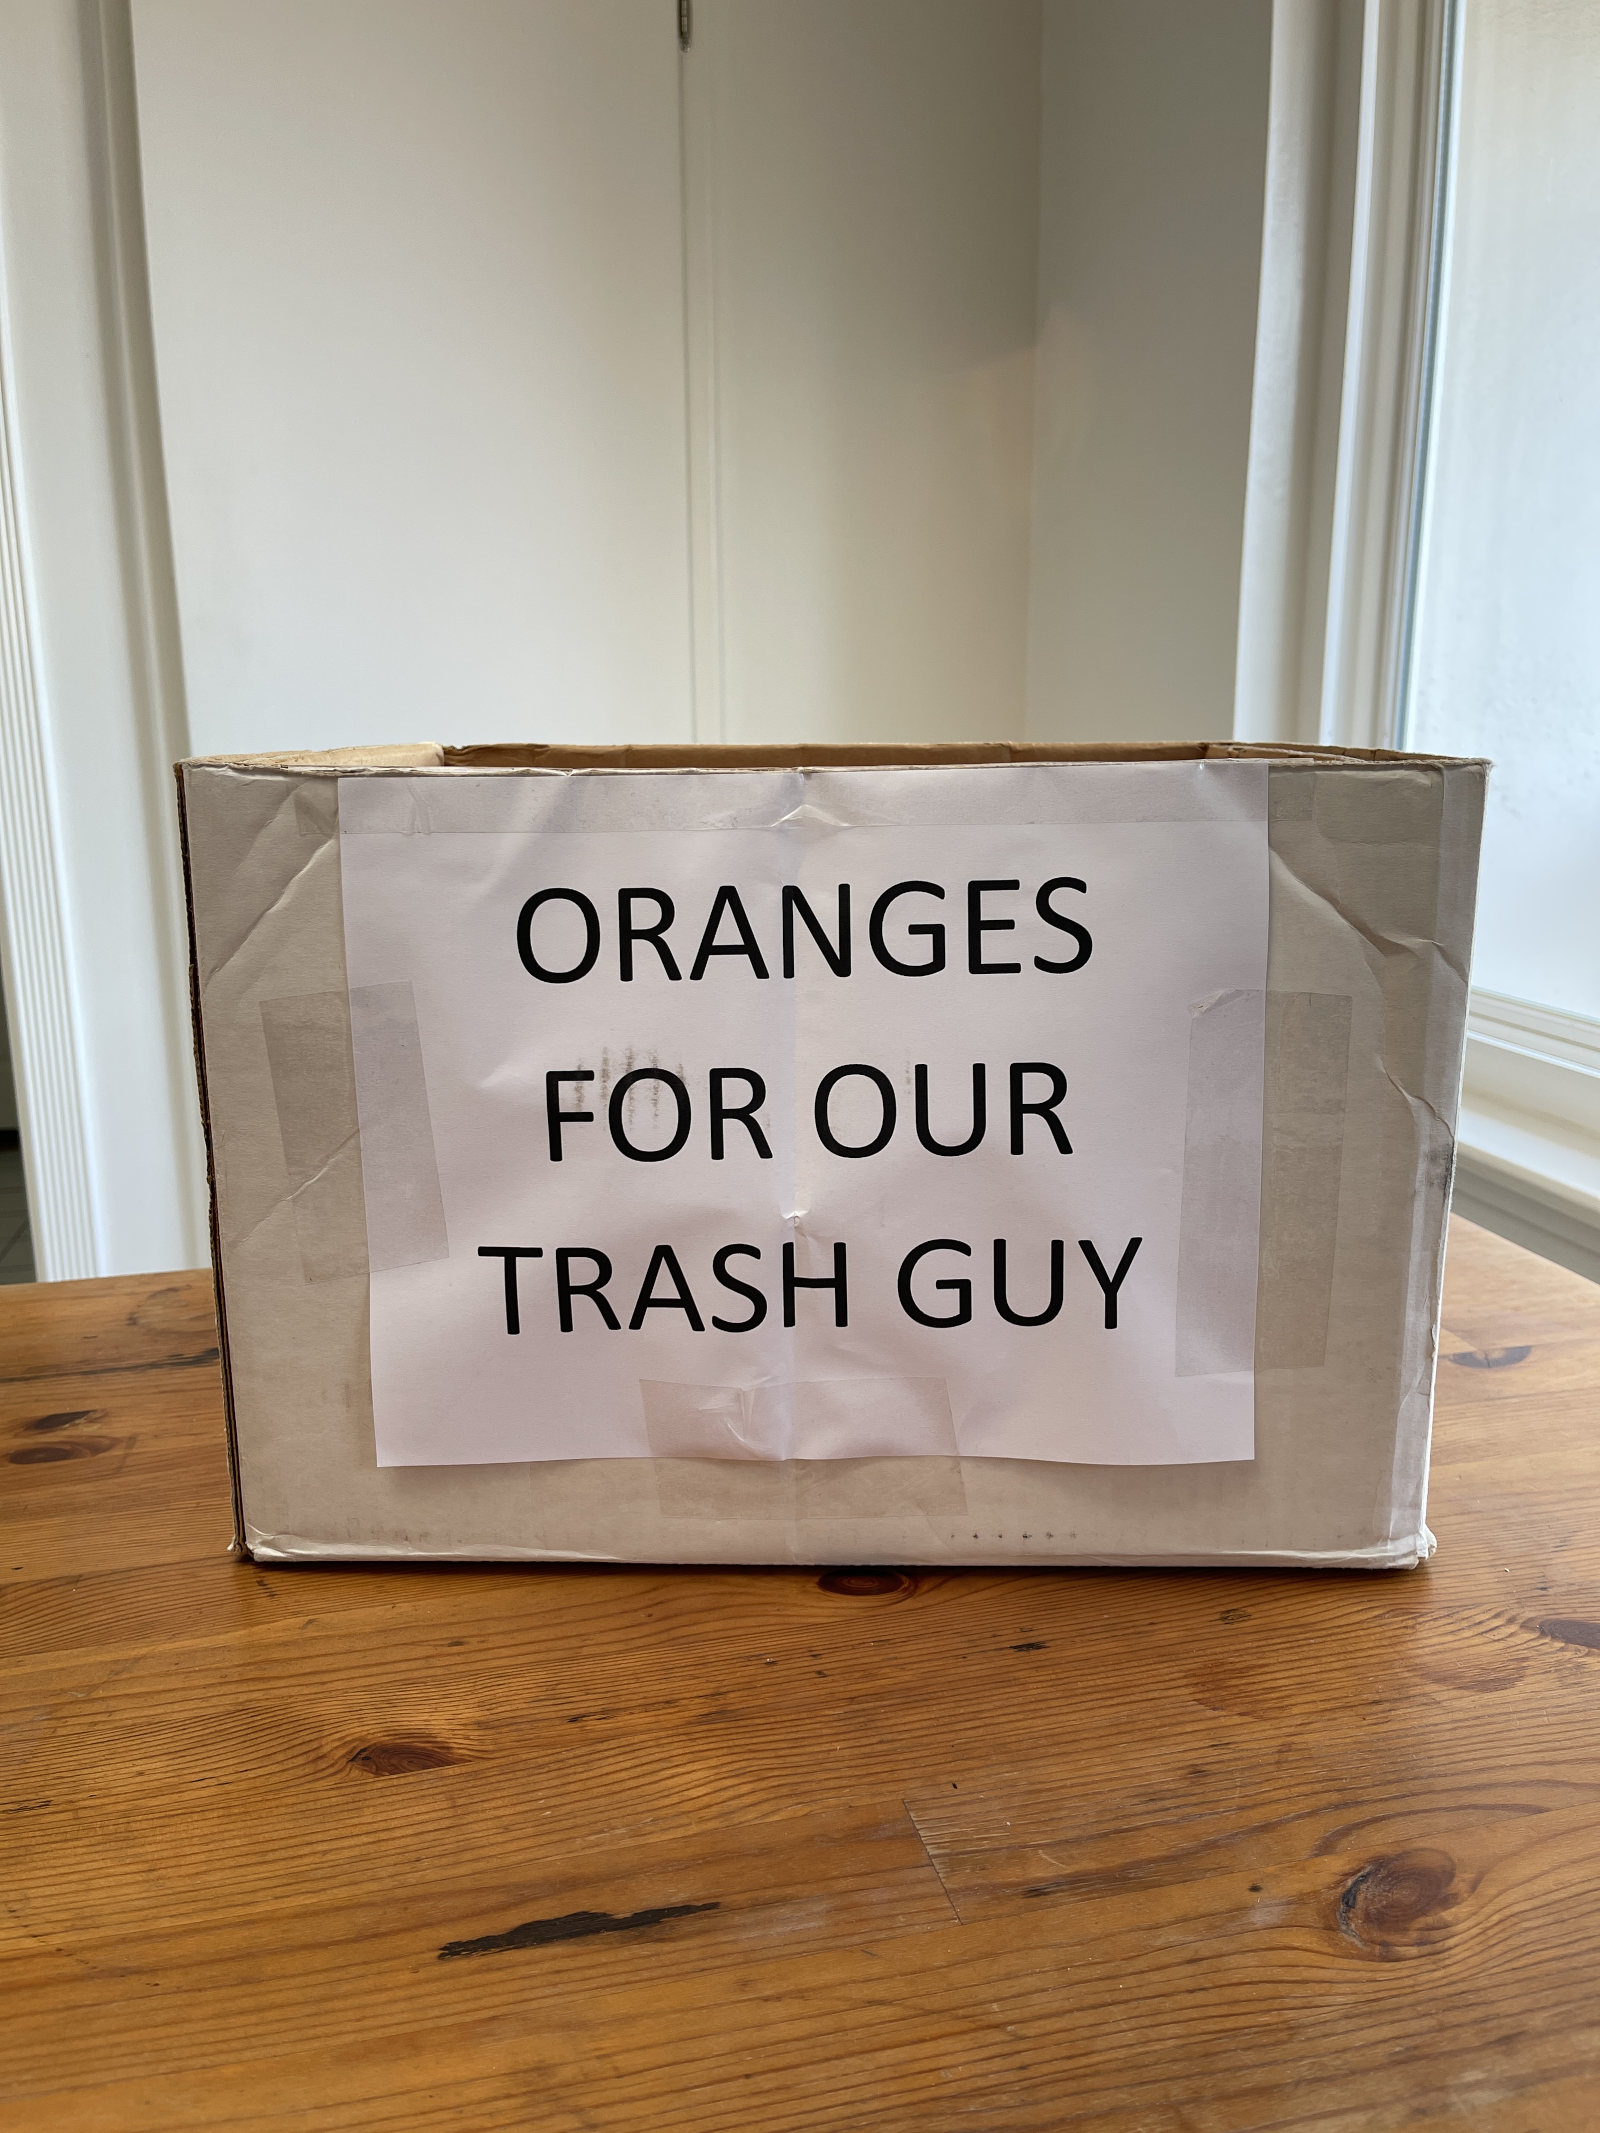 A cardboard box has a sign on the front that says "oranges for our trash guy." The box sits on a wooden table.